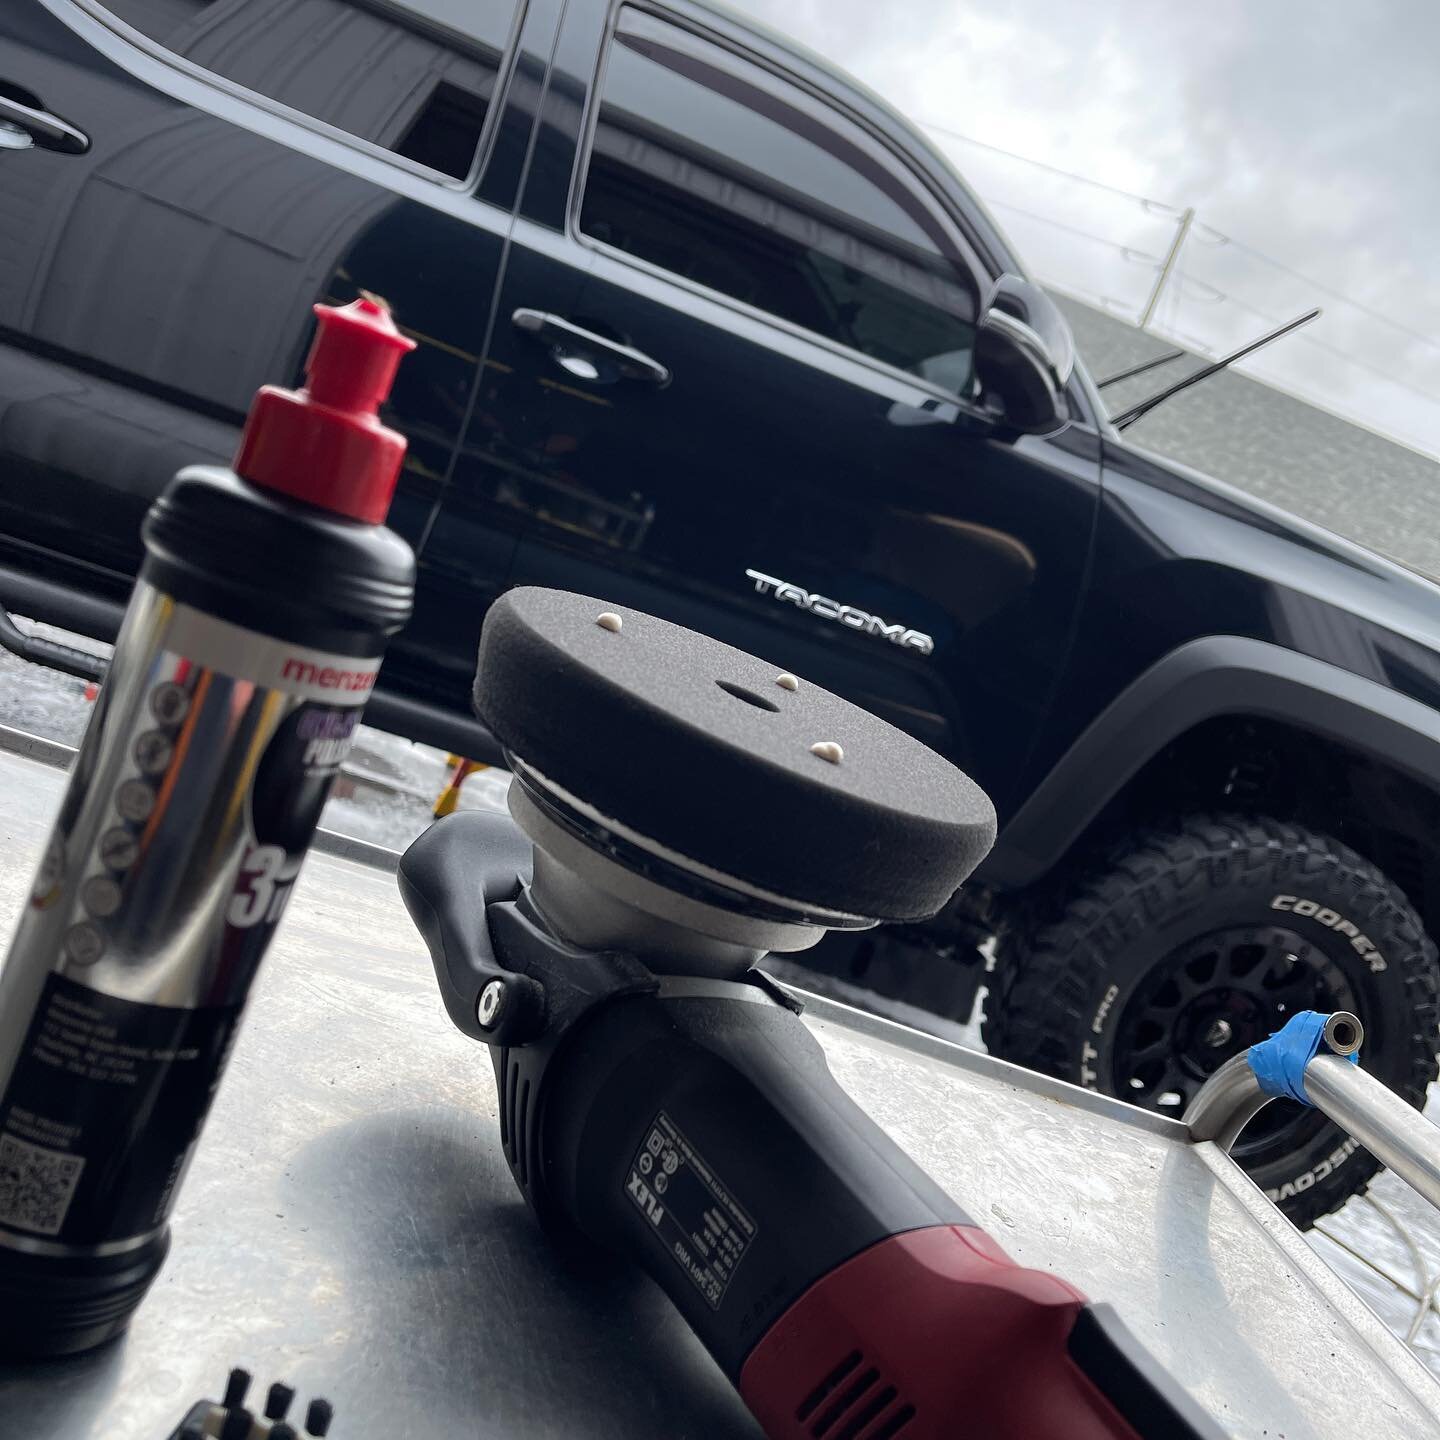 One-Step Polish included in our Gold Package, for more info DM #autodetailing #oregon #toyotatacoma